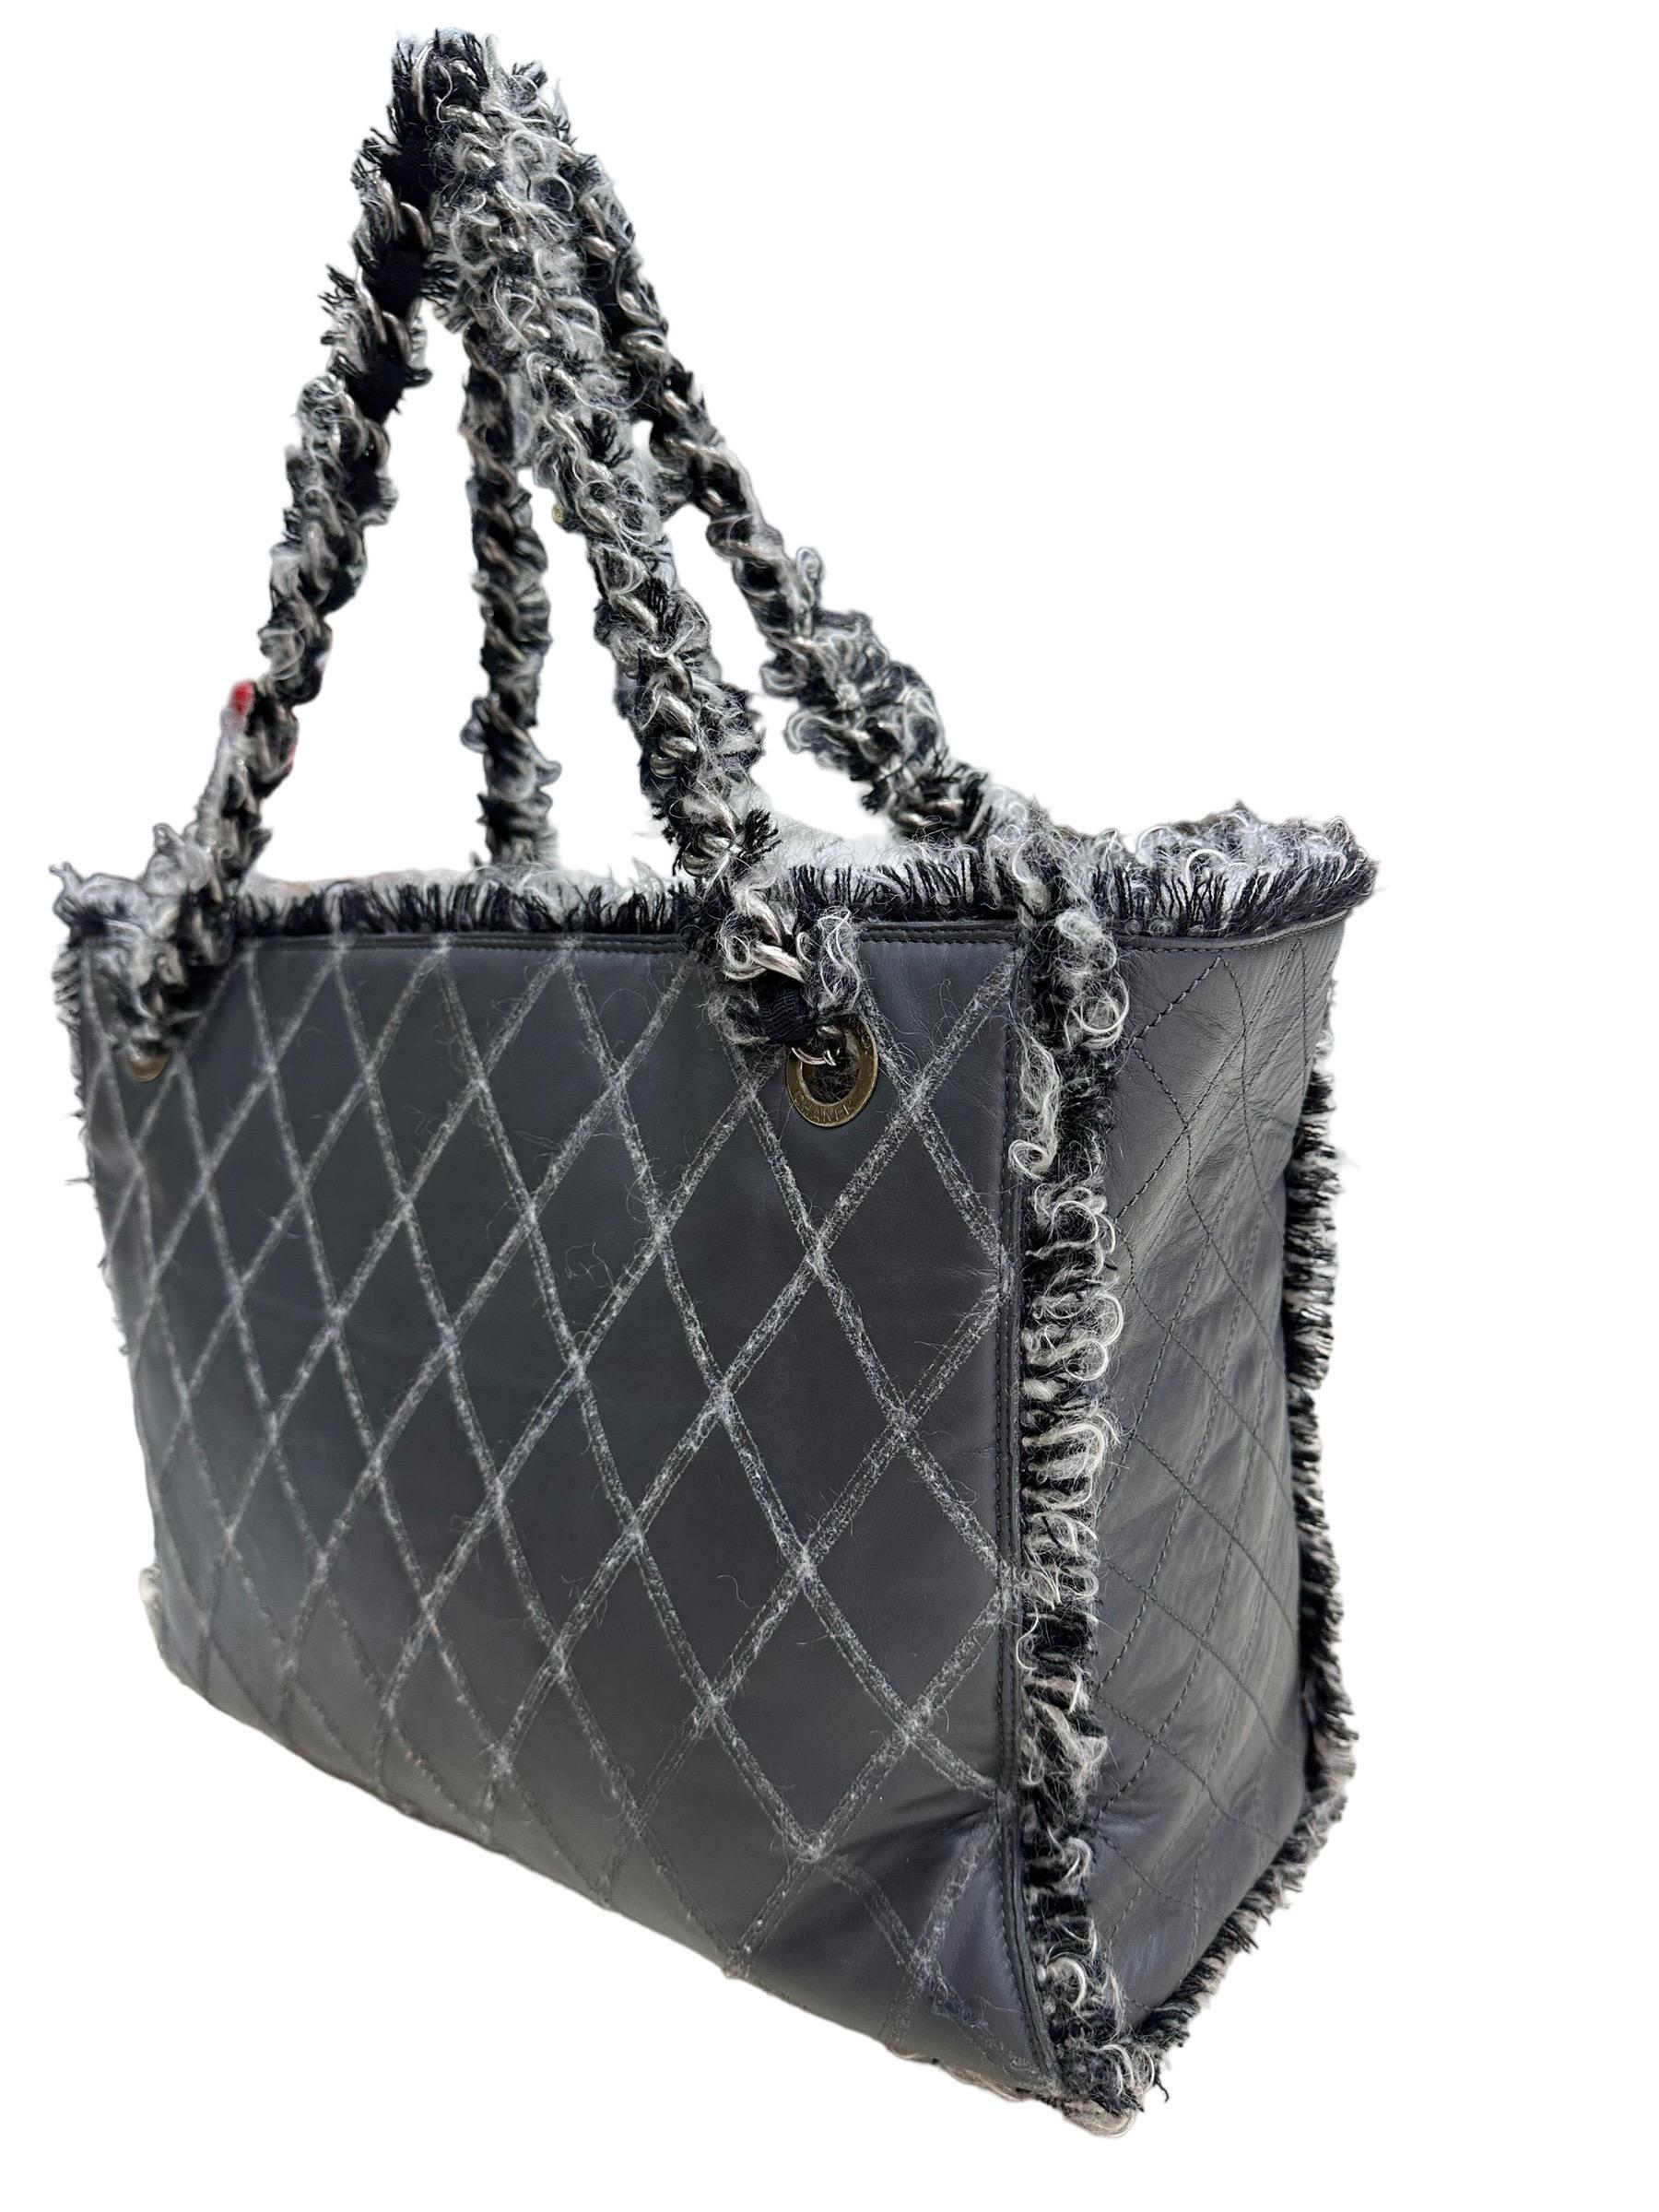 2011 Chanel Tweed Grey Tote Bag For Sale 3